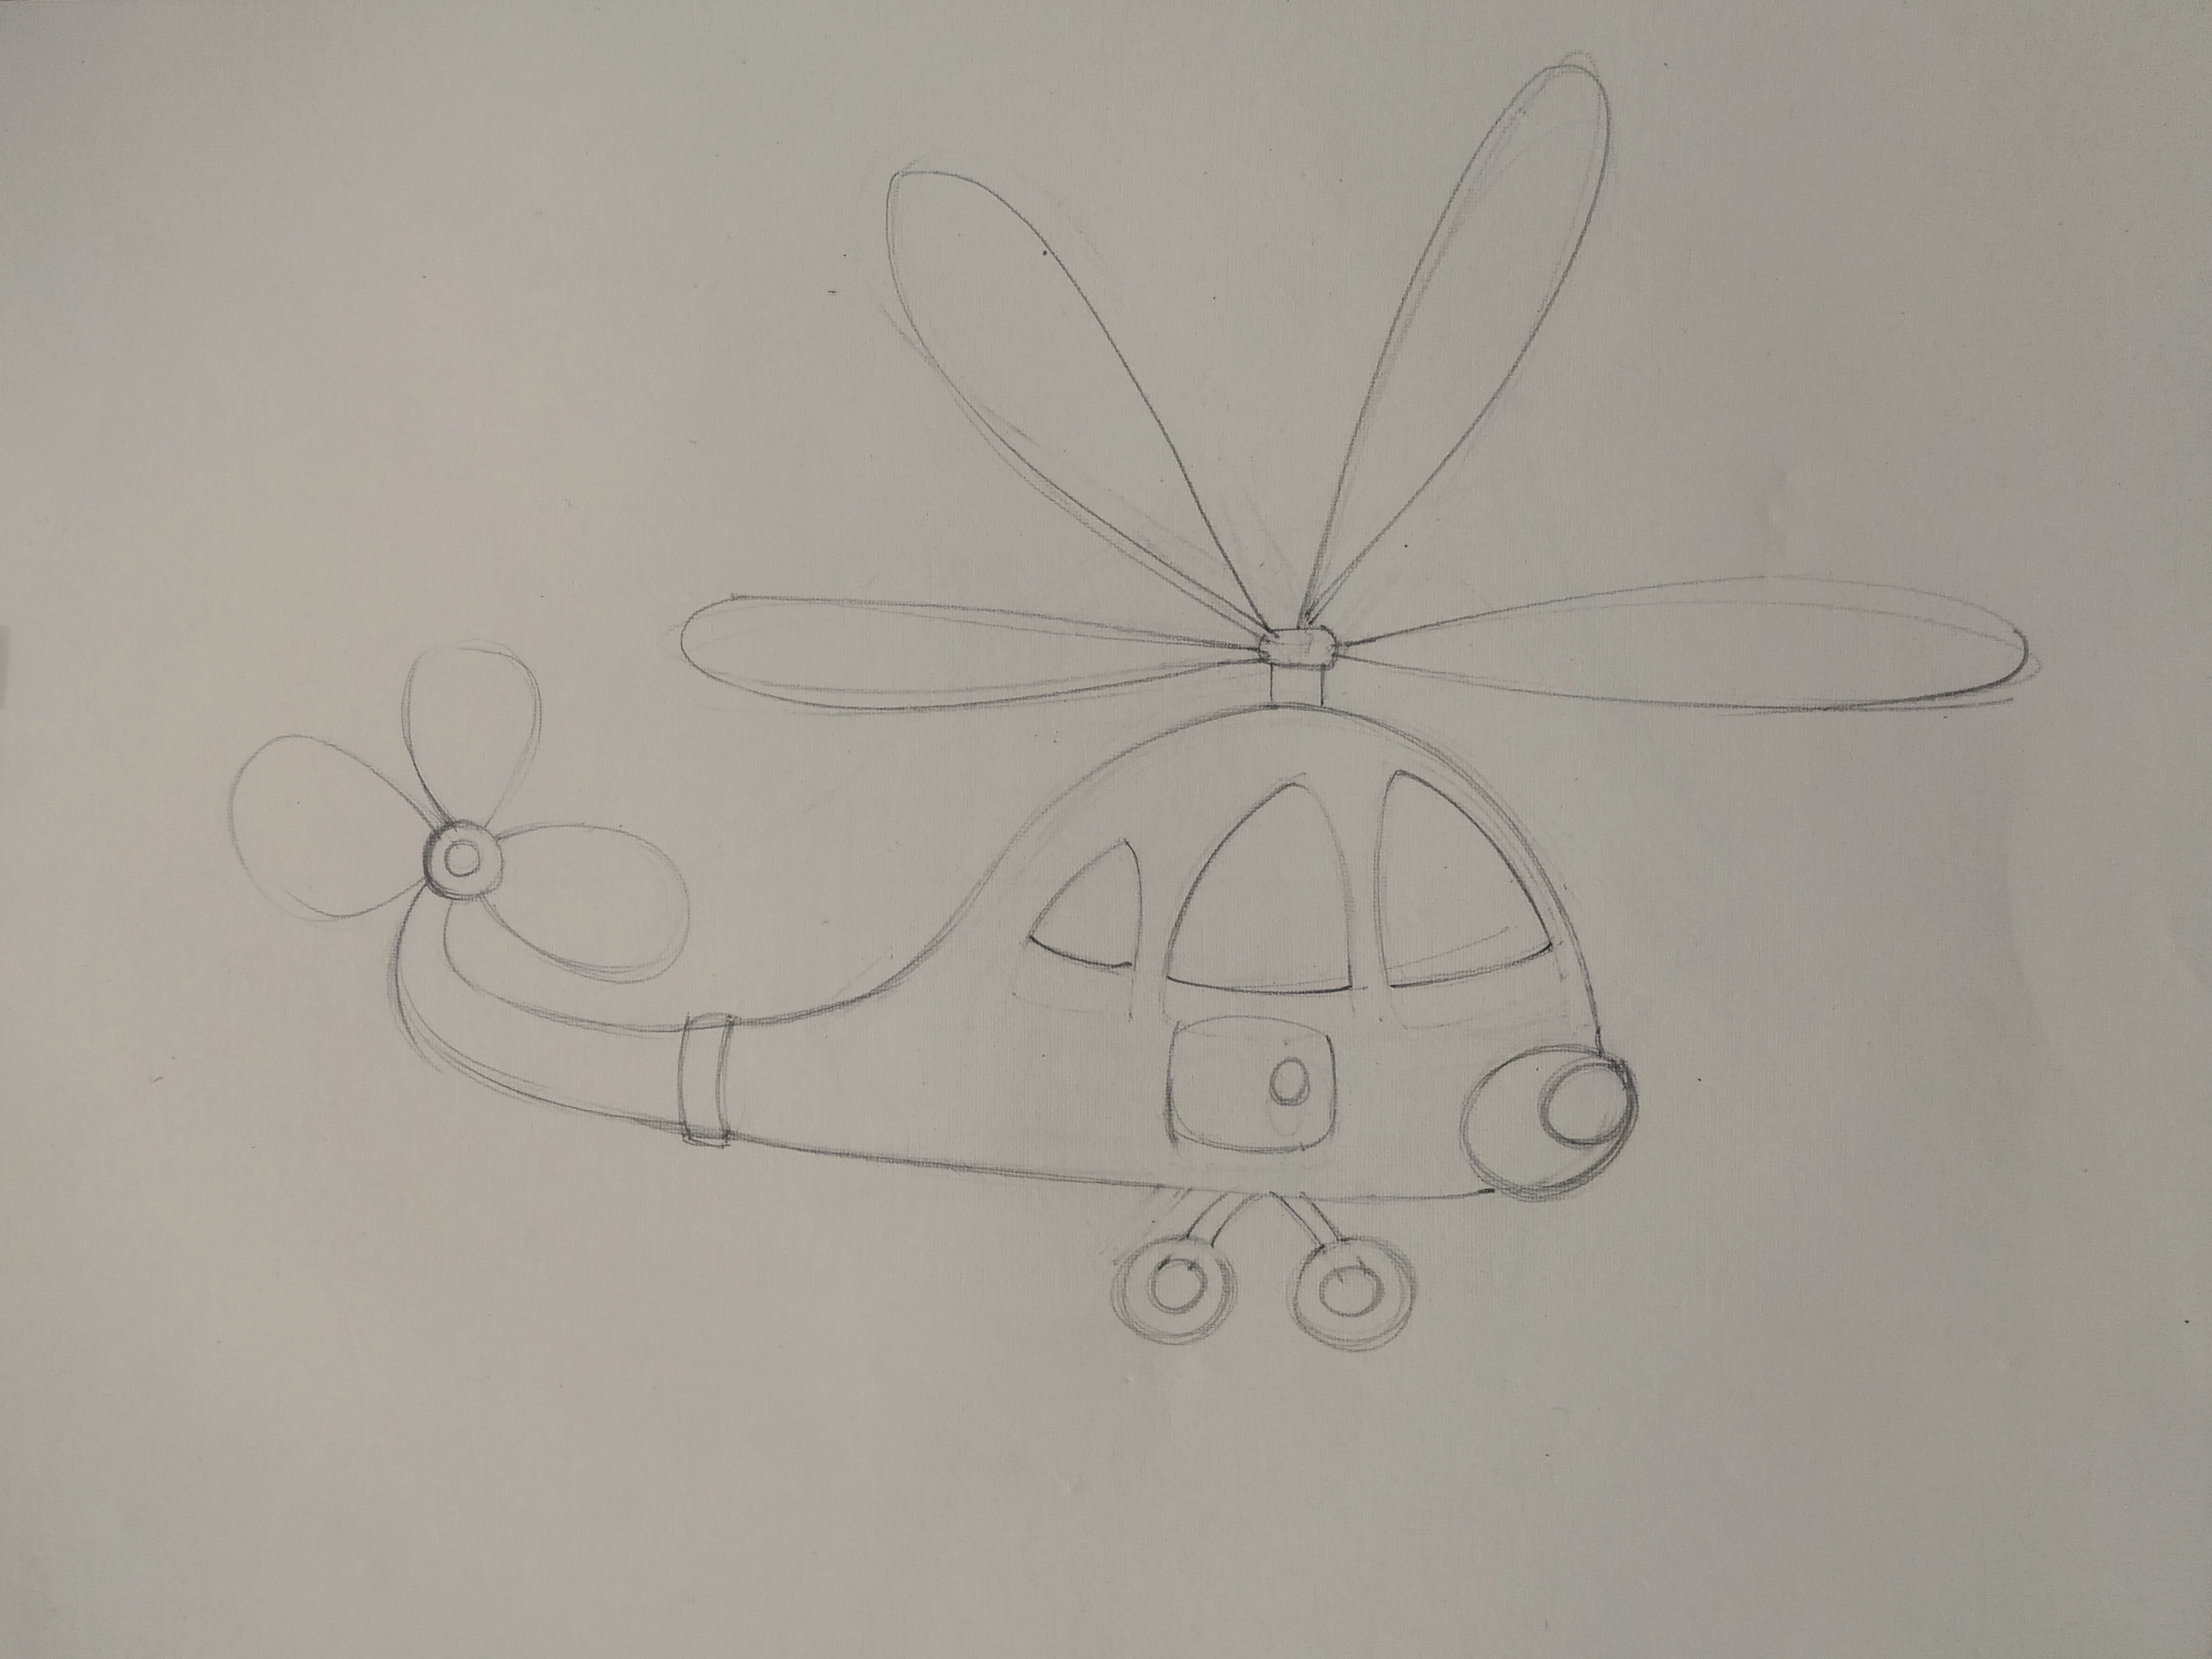 How to Draw a Helicopter - Really Easy Drawing Tutorial